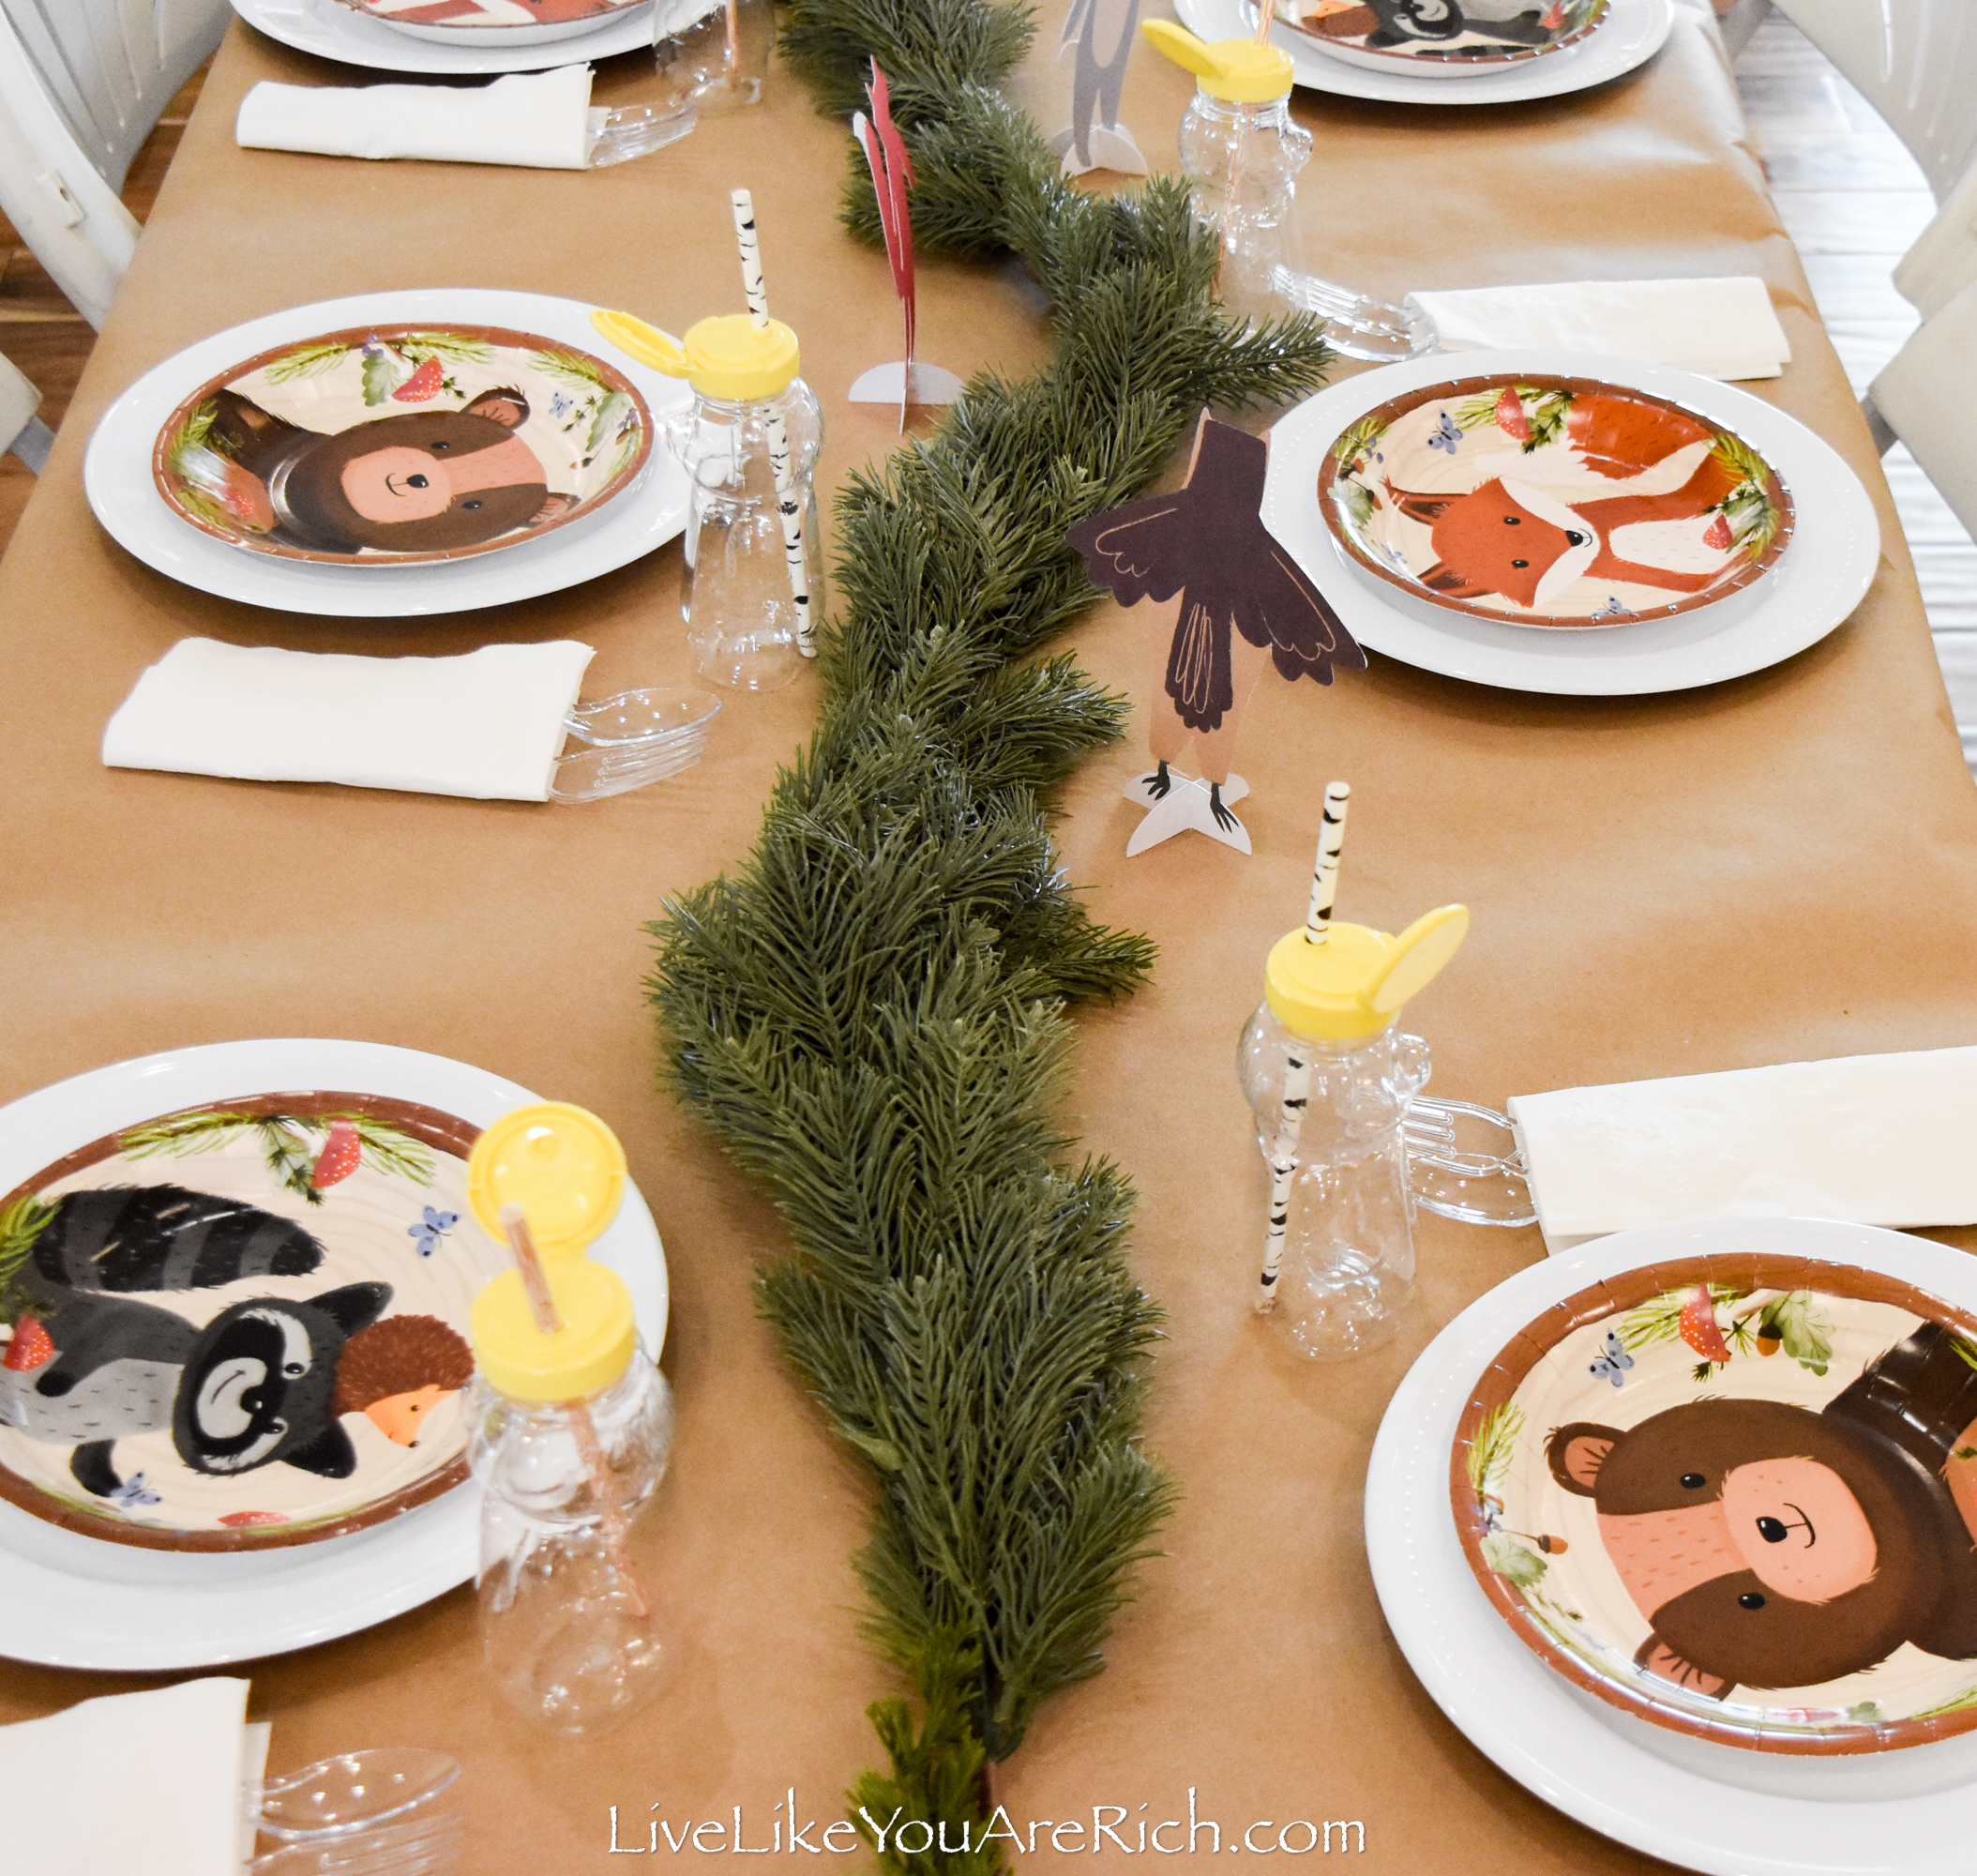 Kids' Woodland Party Tablescape